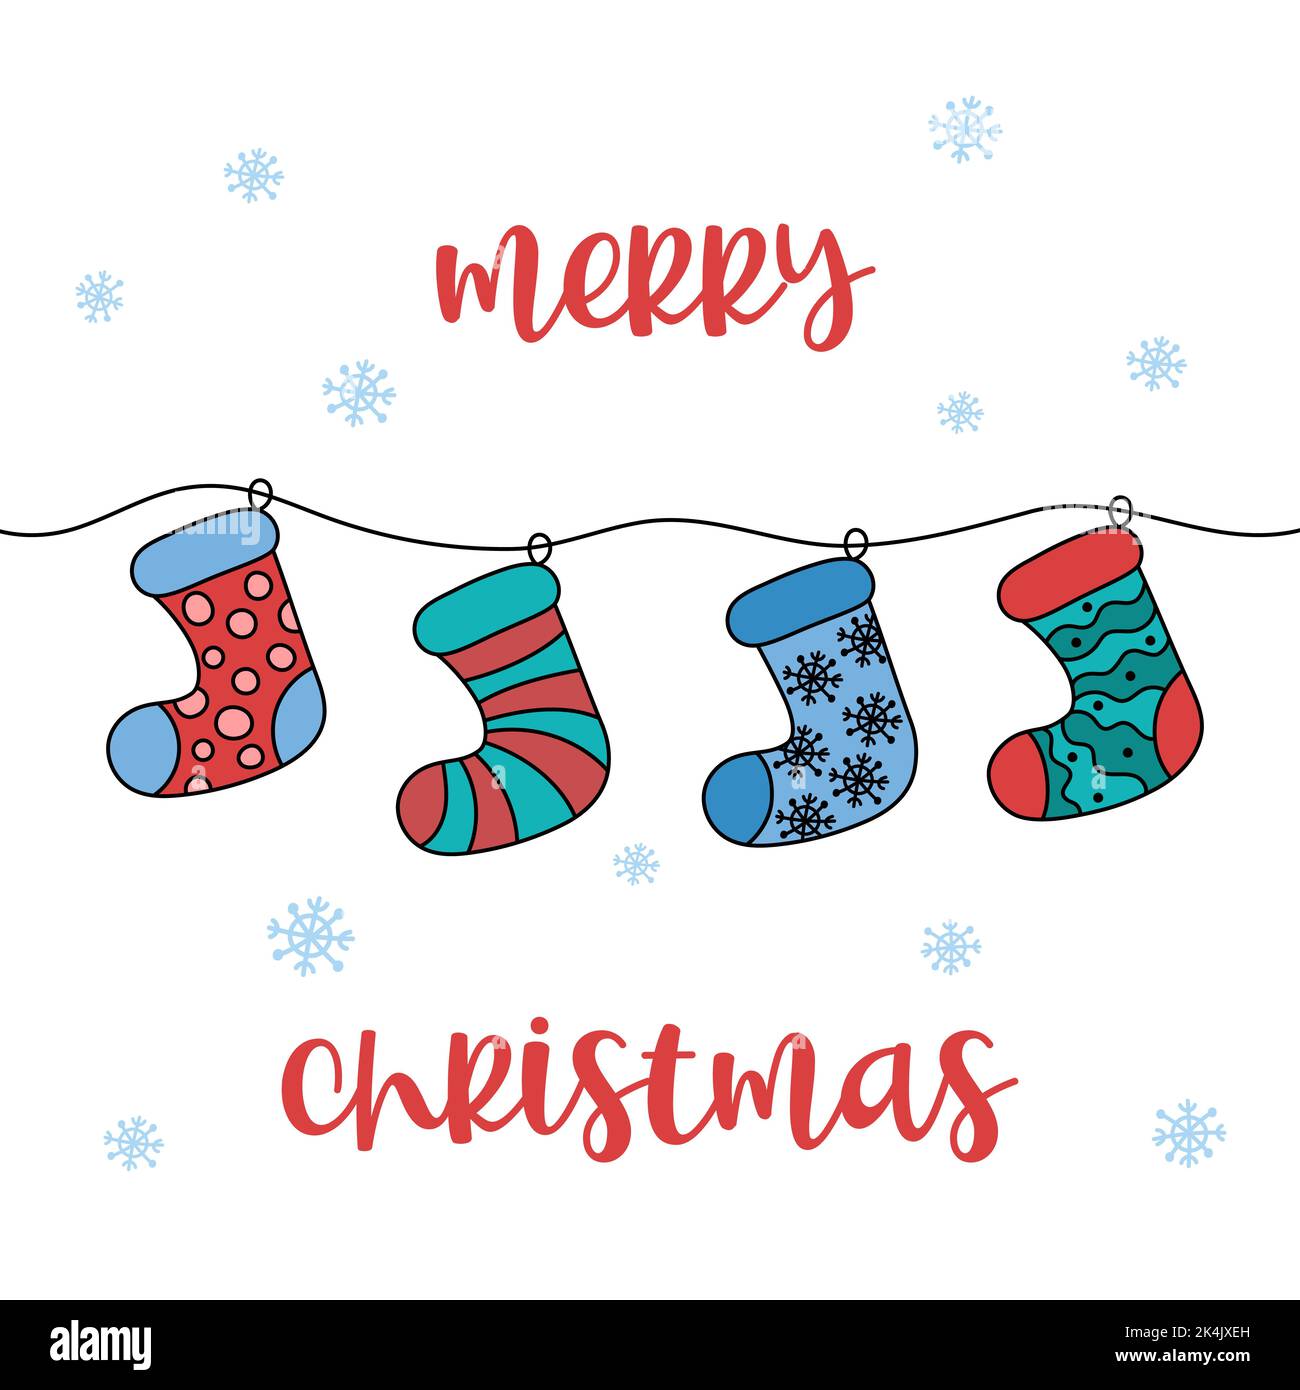 Funny Merry Christmas card. Hanging xmas socks. Vector cute colorful doodles. Outline hand drawn illustrations of isolated festive stockings for gifts Stock Vector